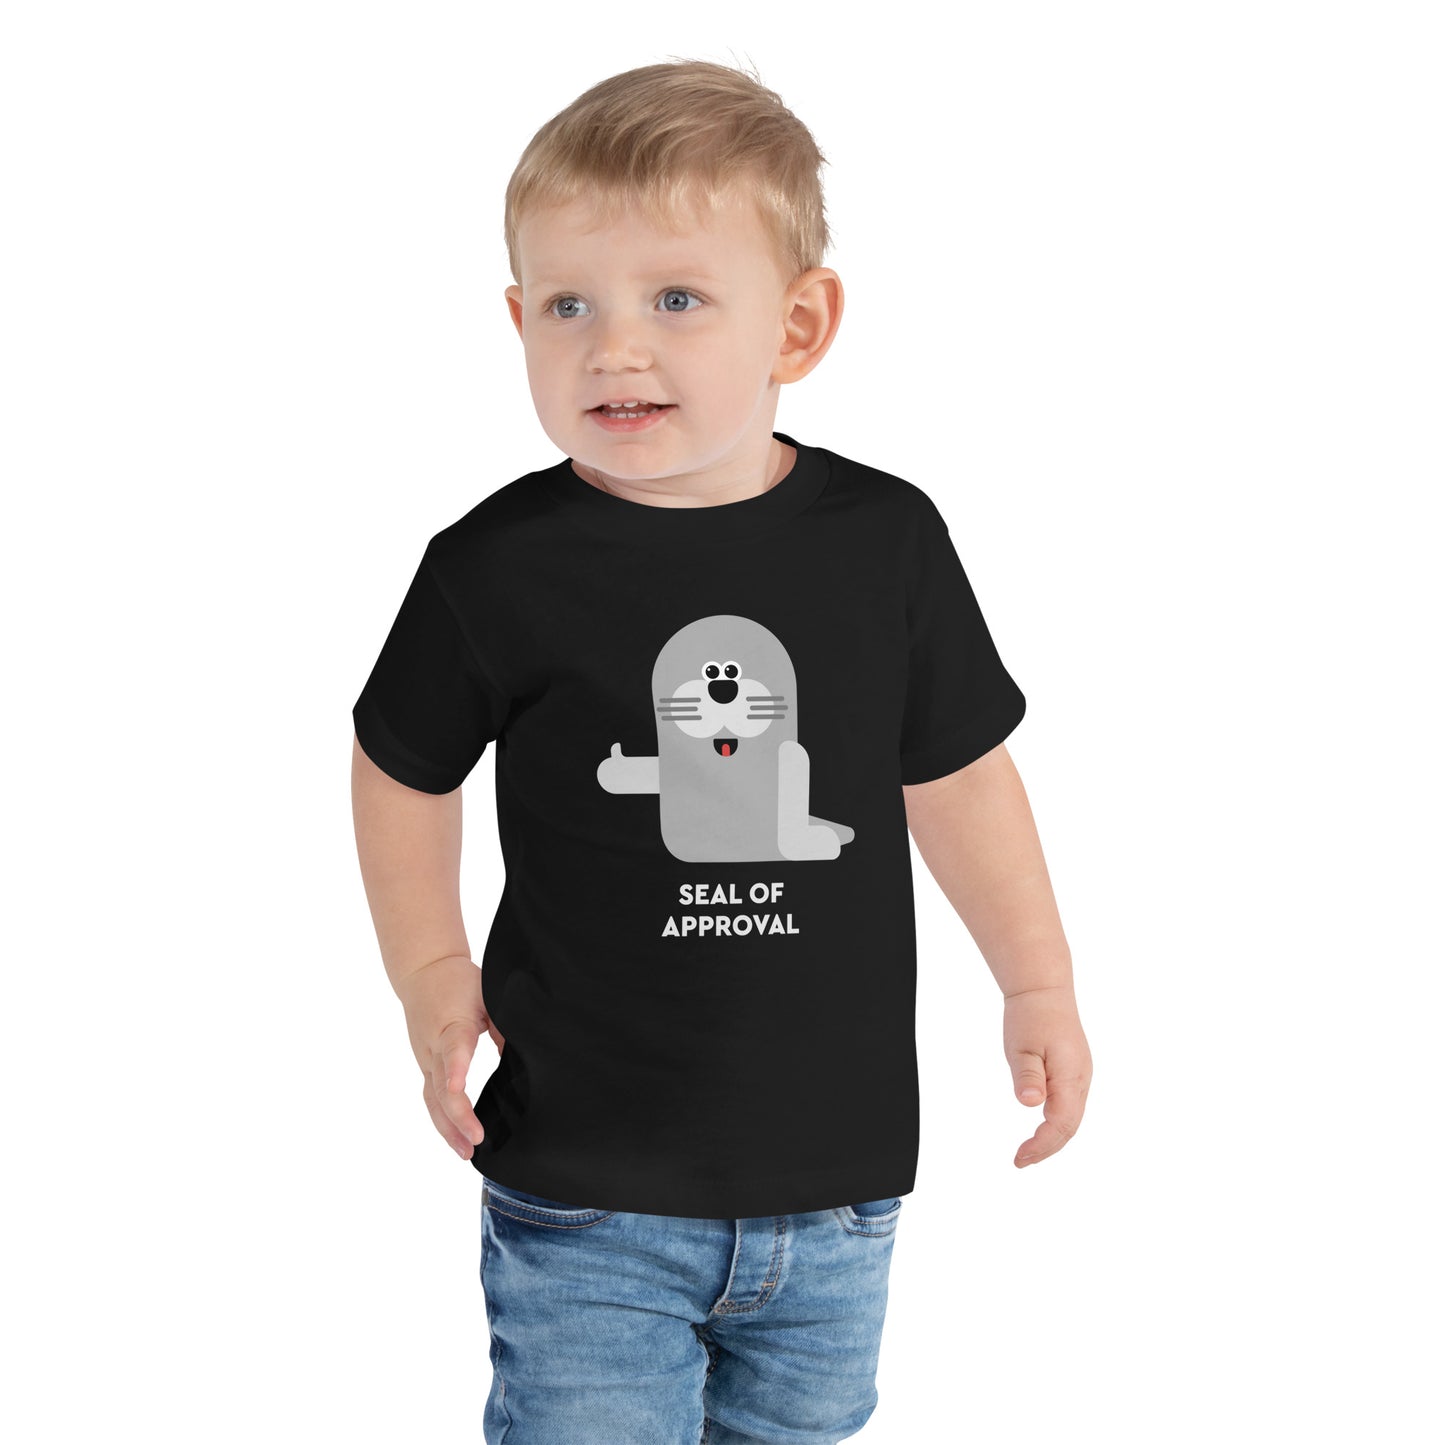 Toddler - Seal of Approval - Short Sleeve Tee